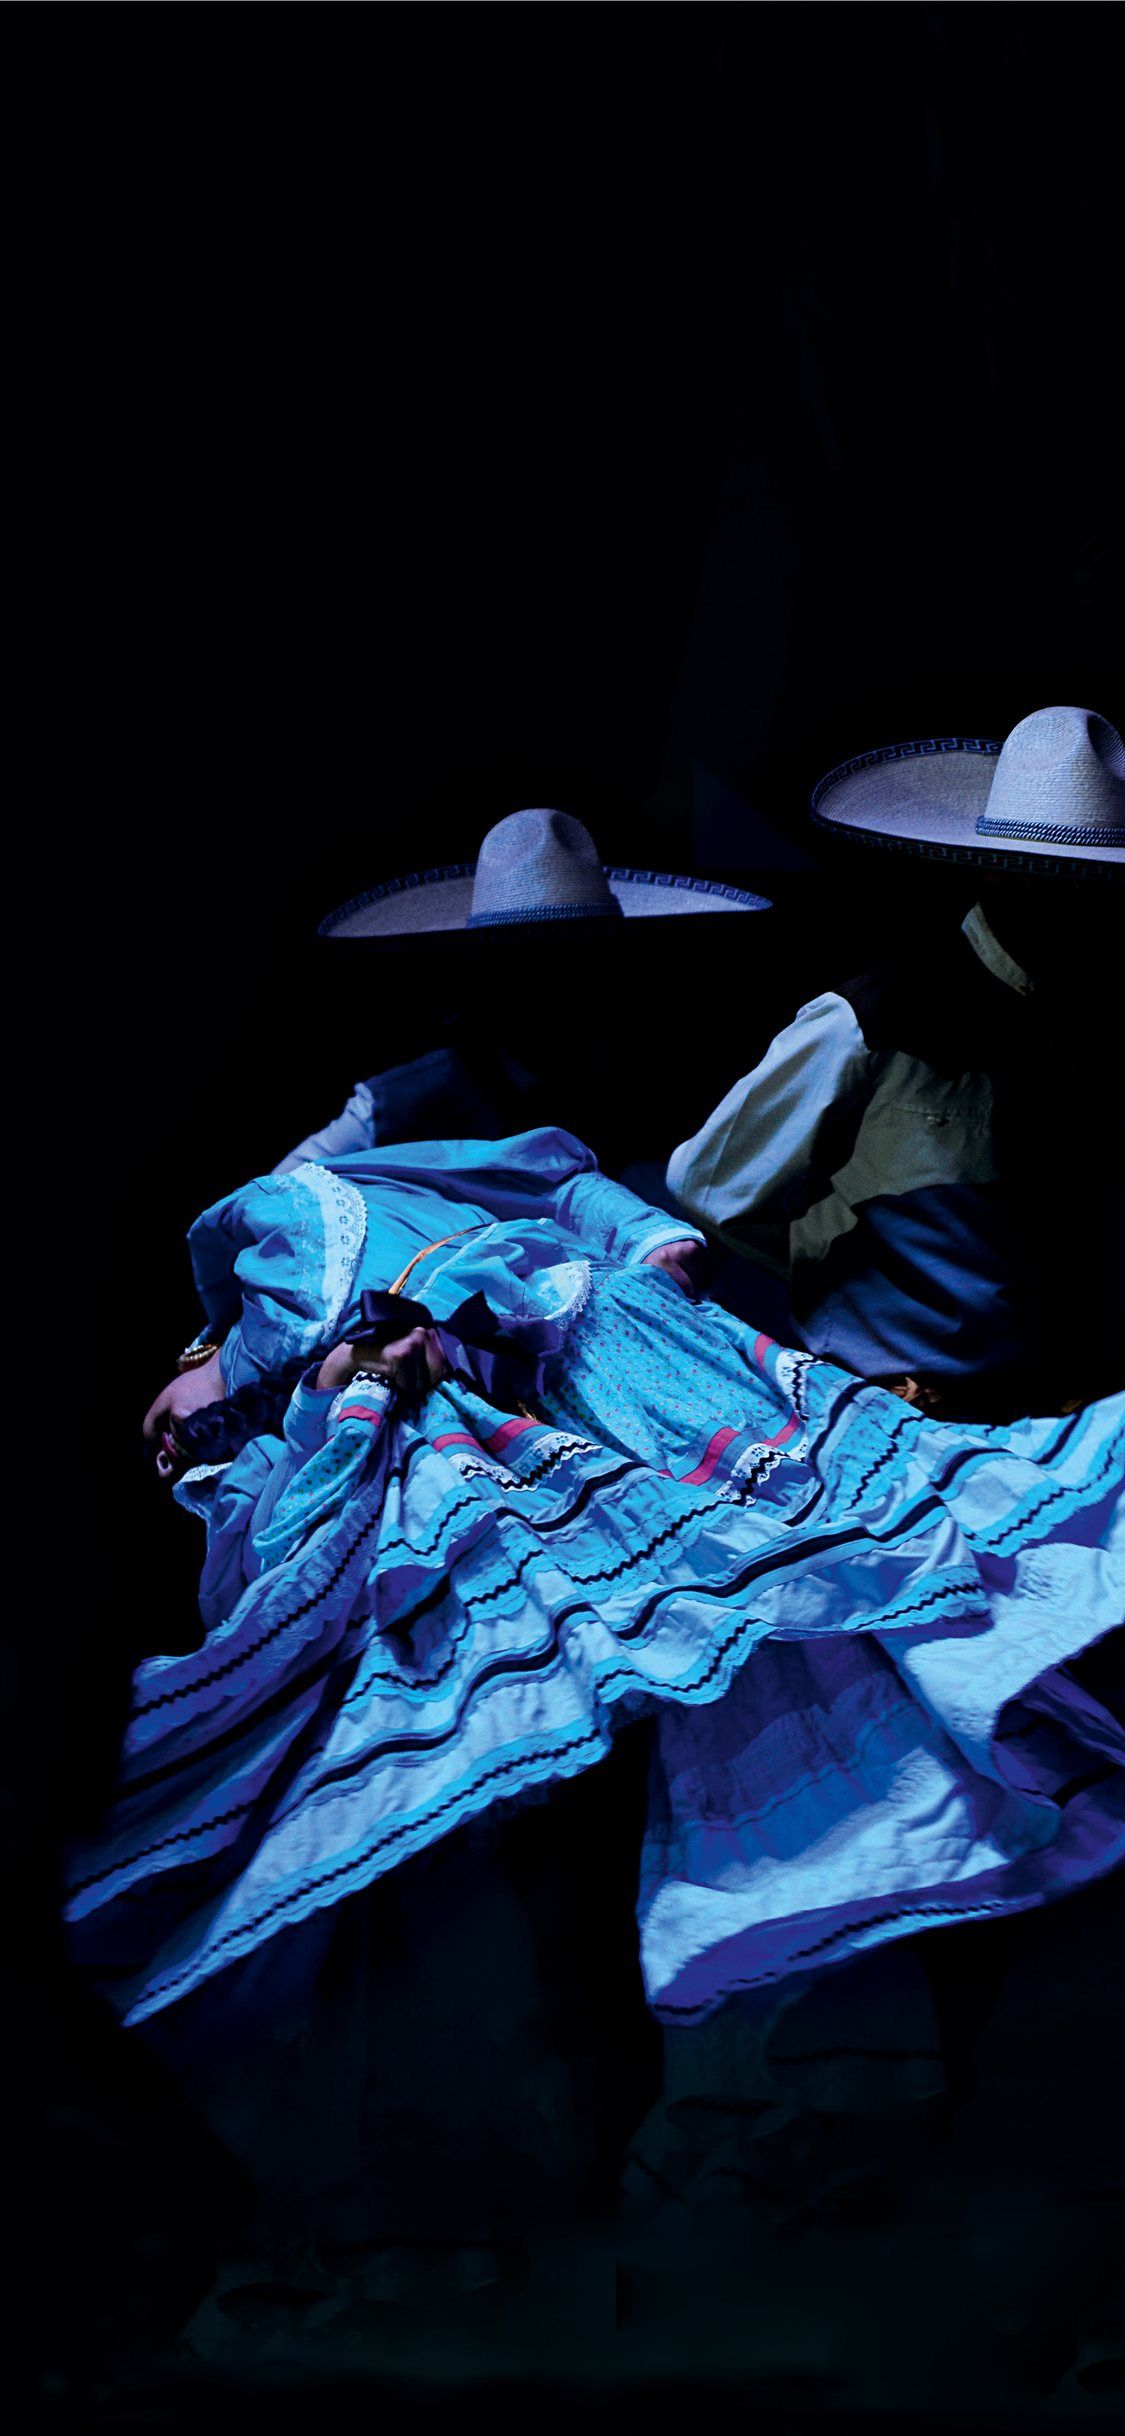 A man and a woman in sombreros dance together in a dark room. - Dance, Mexico